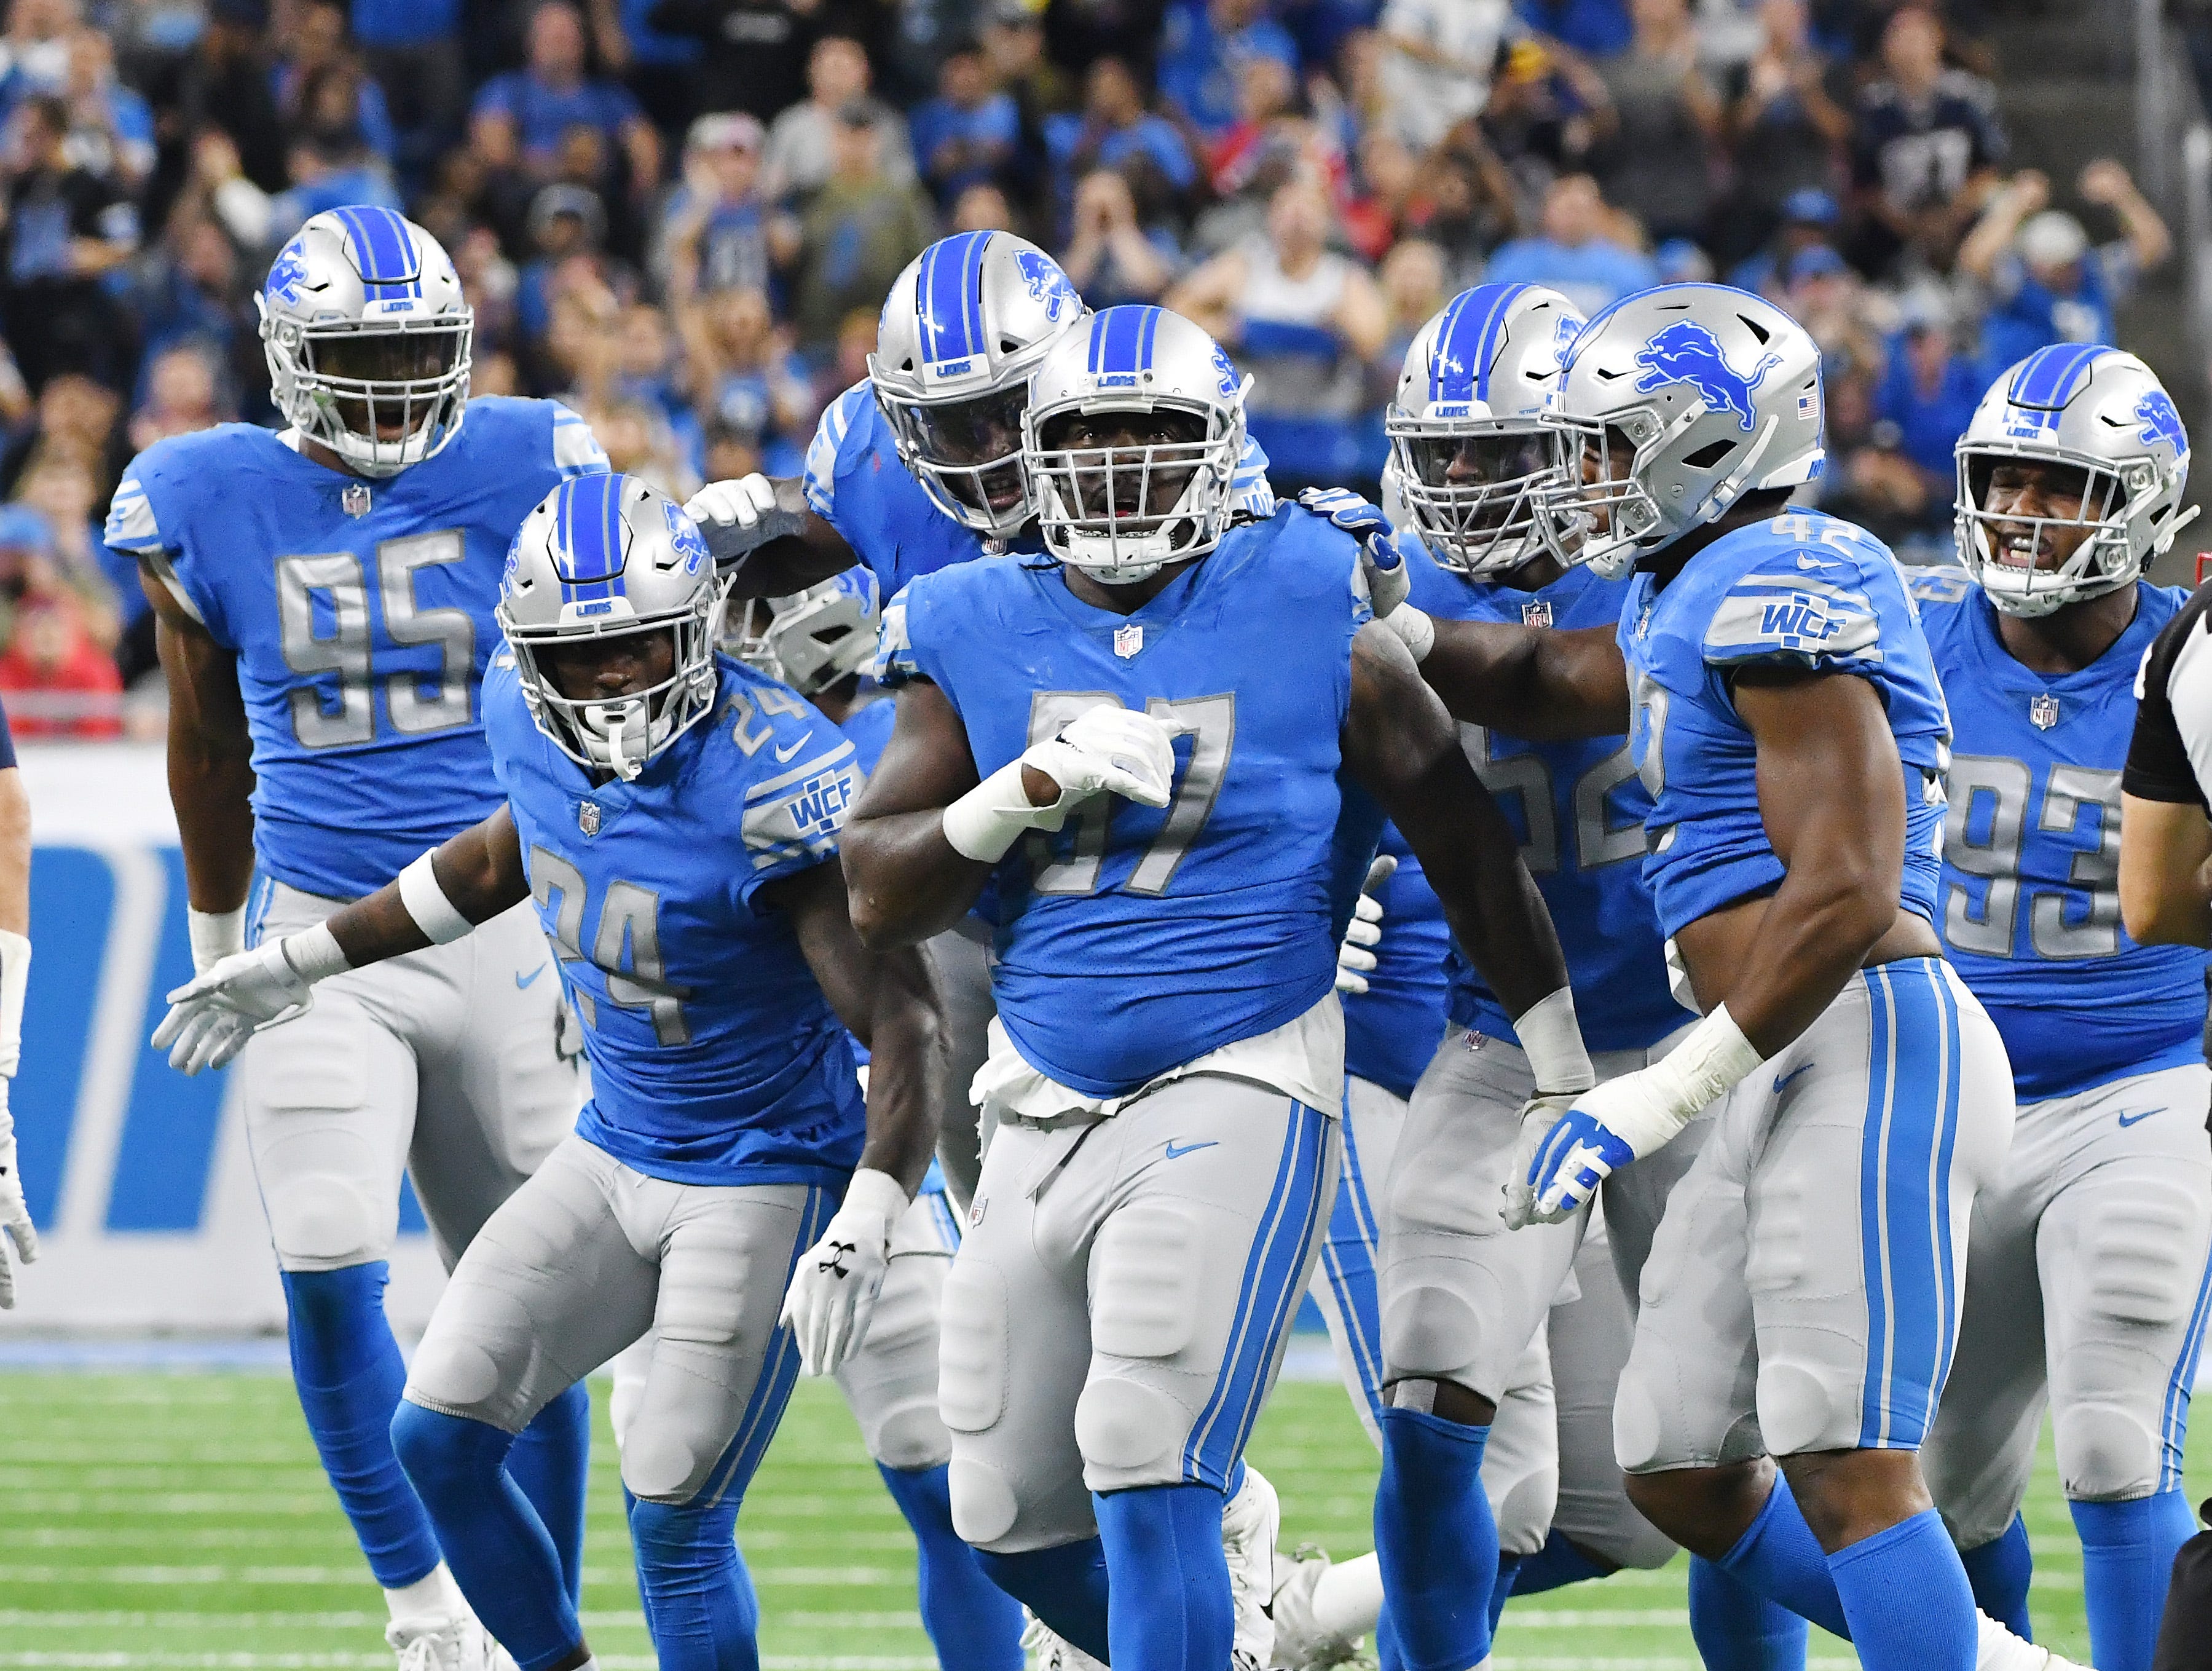 Lions celebrate with teammate Ricky Jean Francois after topping Patriots on third down, forcing New England to punt in the second quarter.